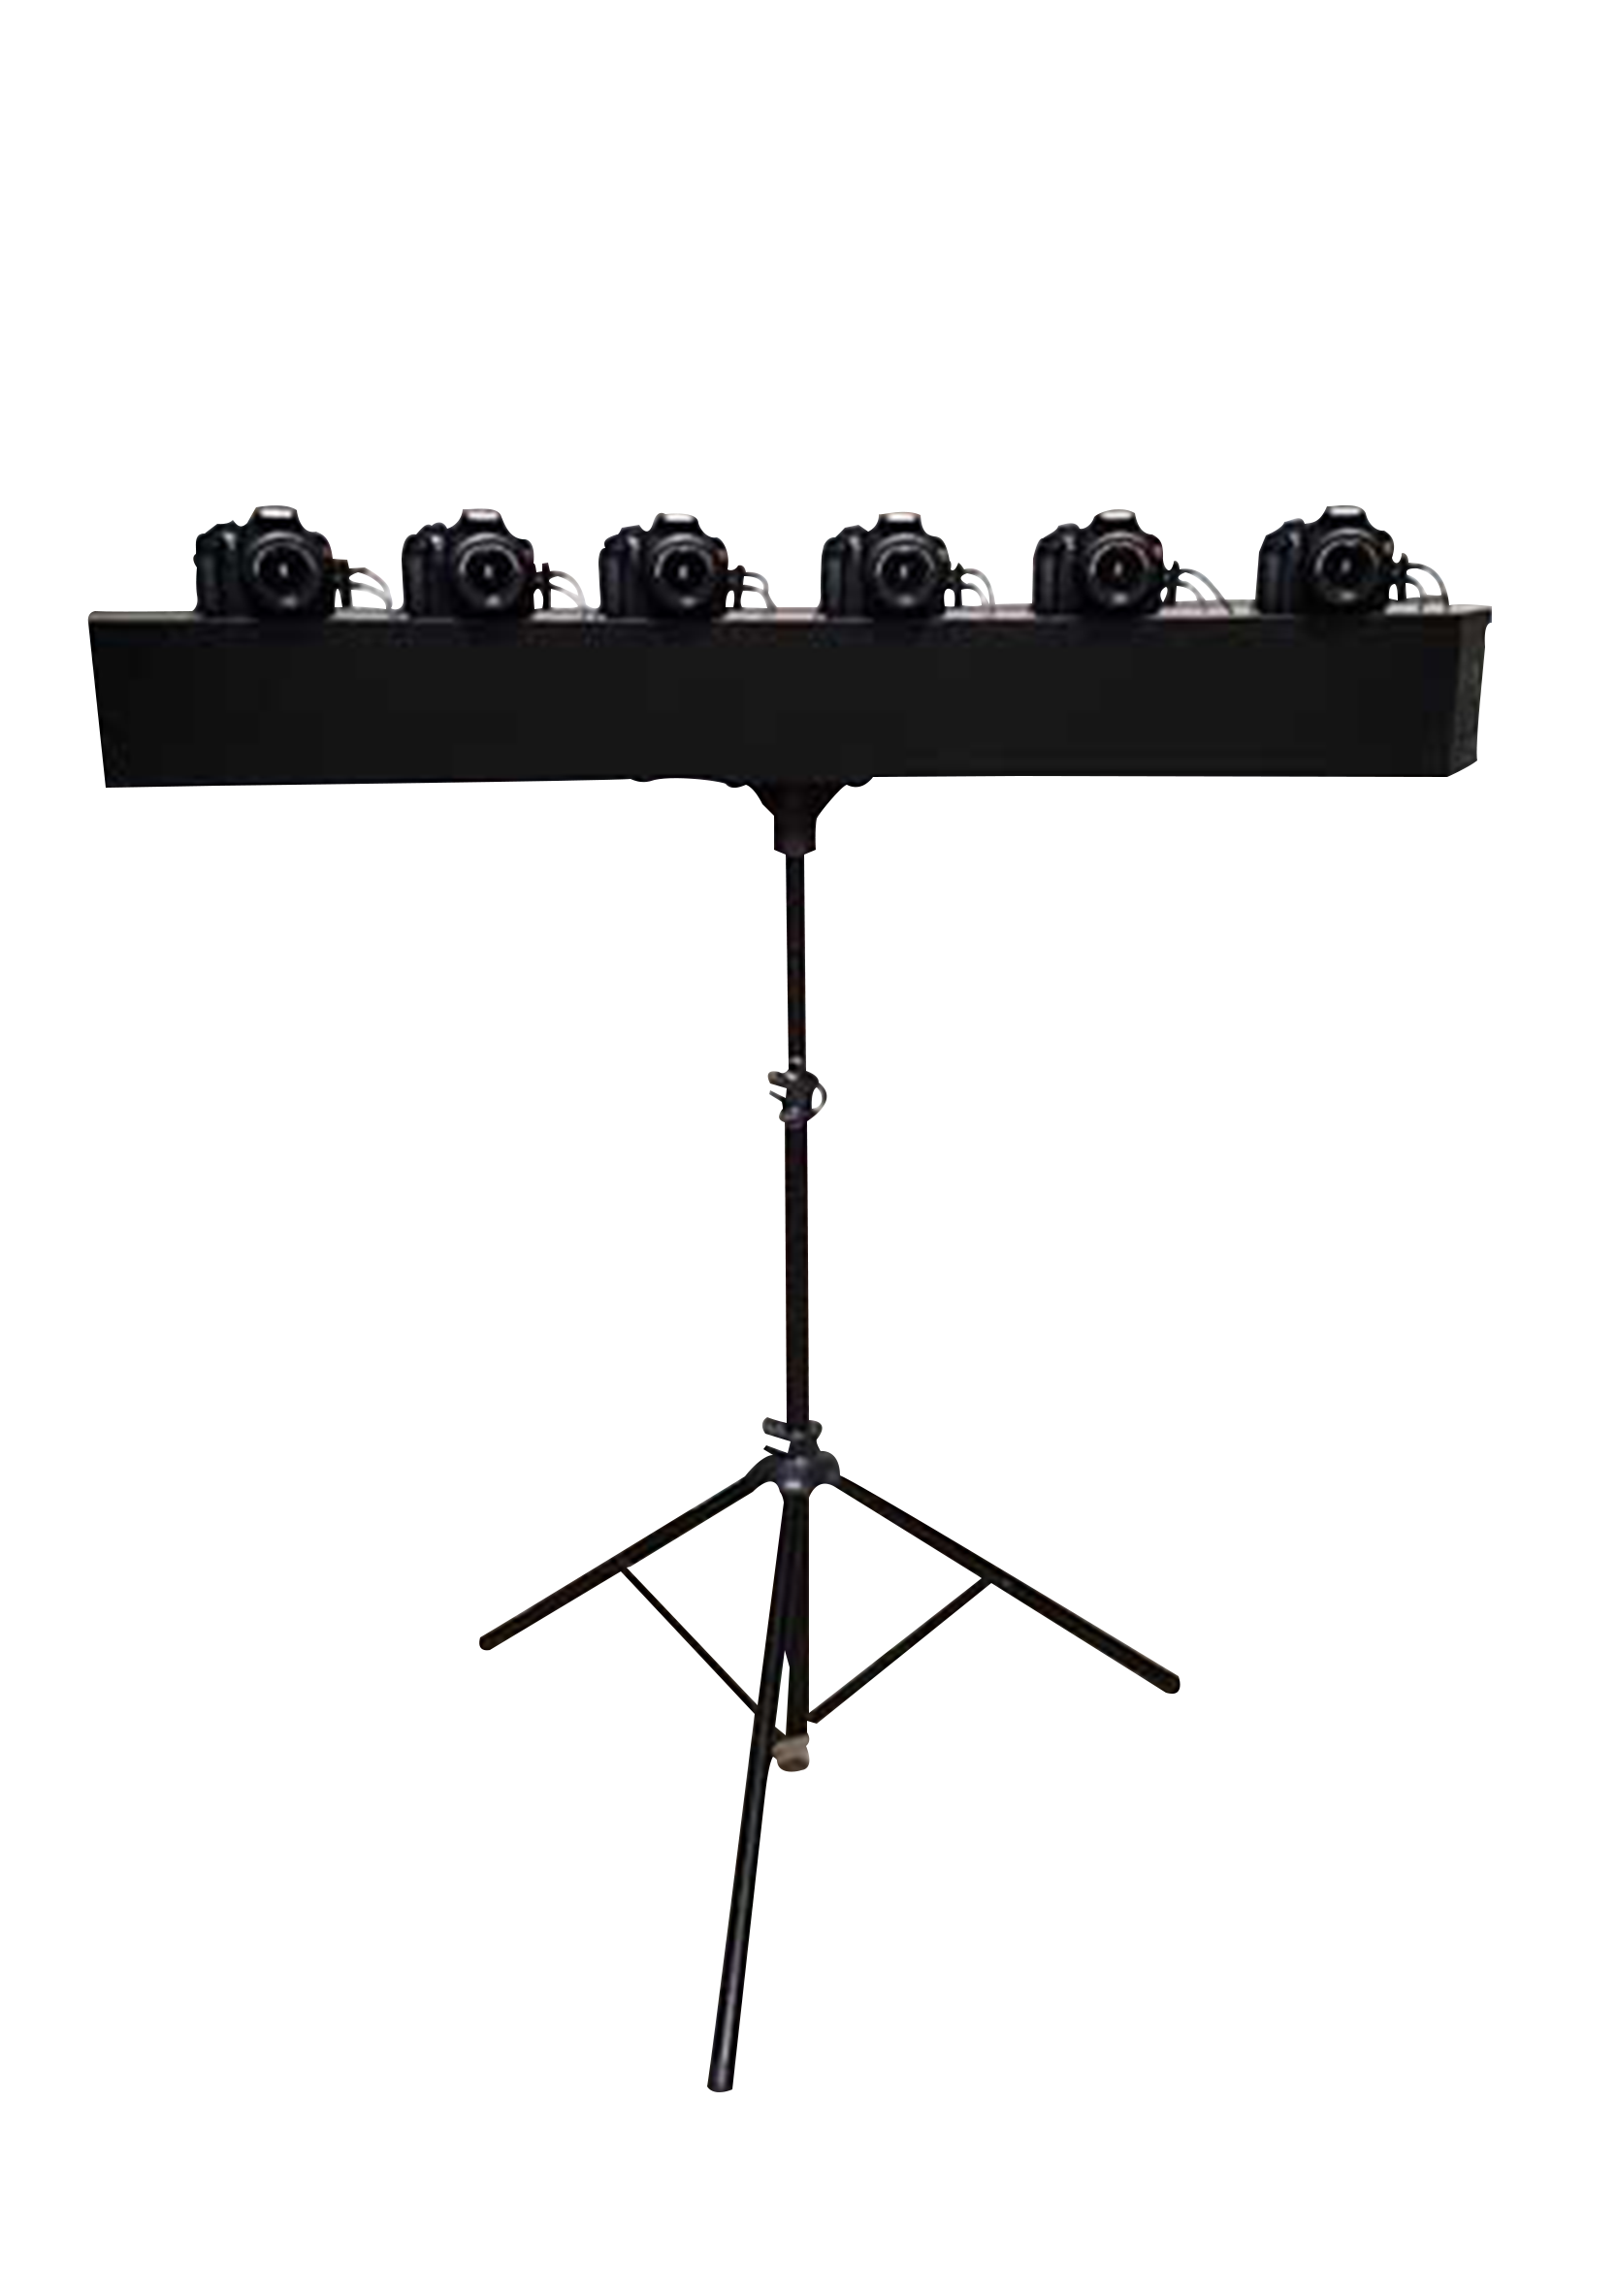 a photo of Maple Leaf Photo Booths's camera array that creates 3d GIFs in NYC, LA, San Francisco, Las Vegas, and beyond.